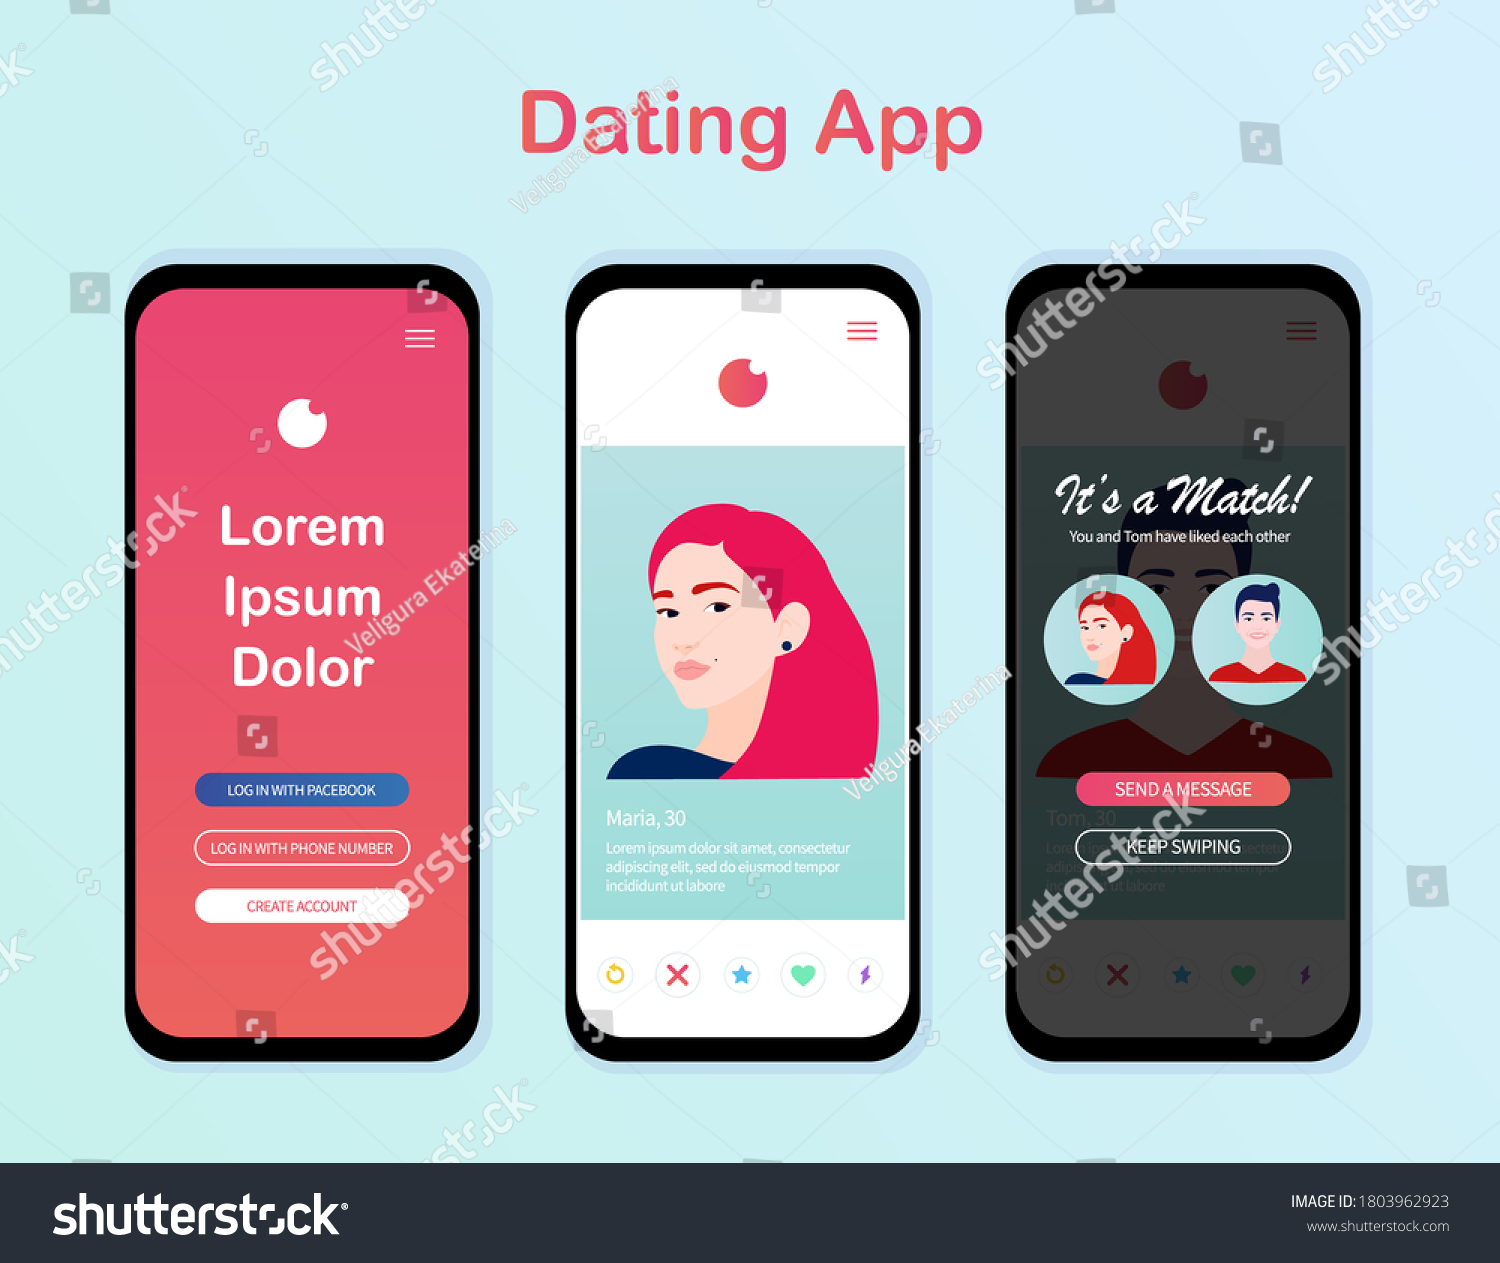 Mobile phone dating applications